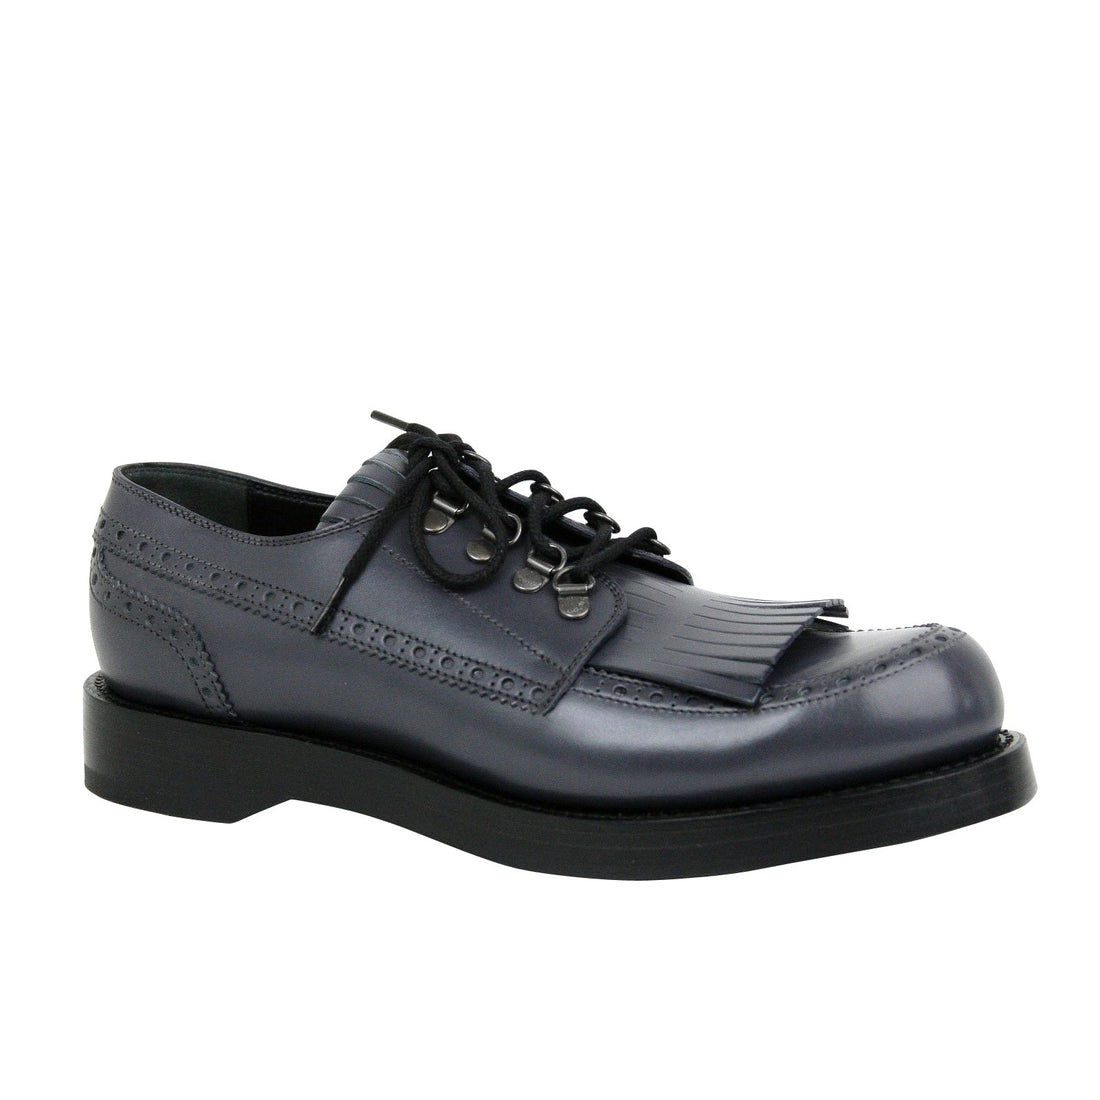 Gucci Gucci Men's Fringed Brogue Bluish Gray Leather Lace-up Shoes